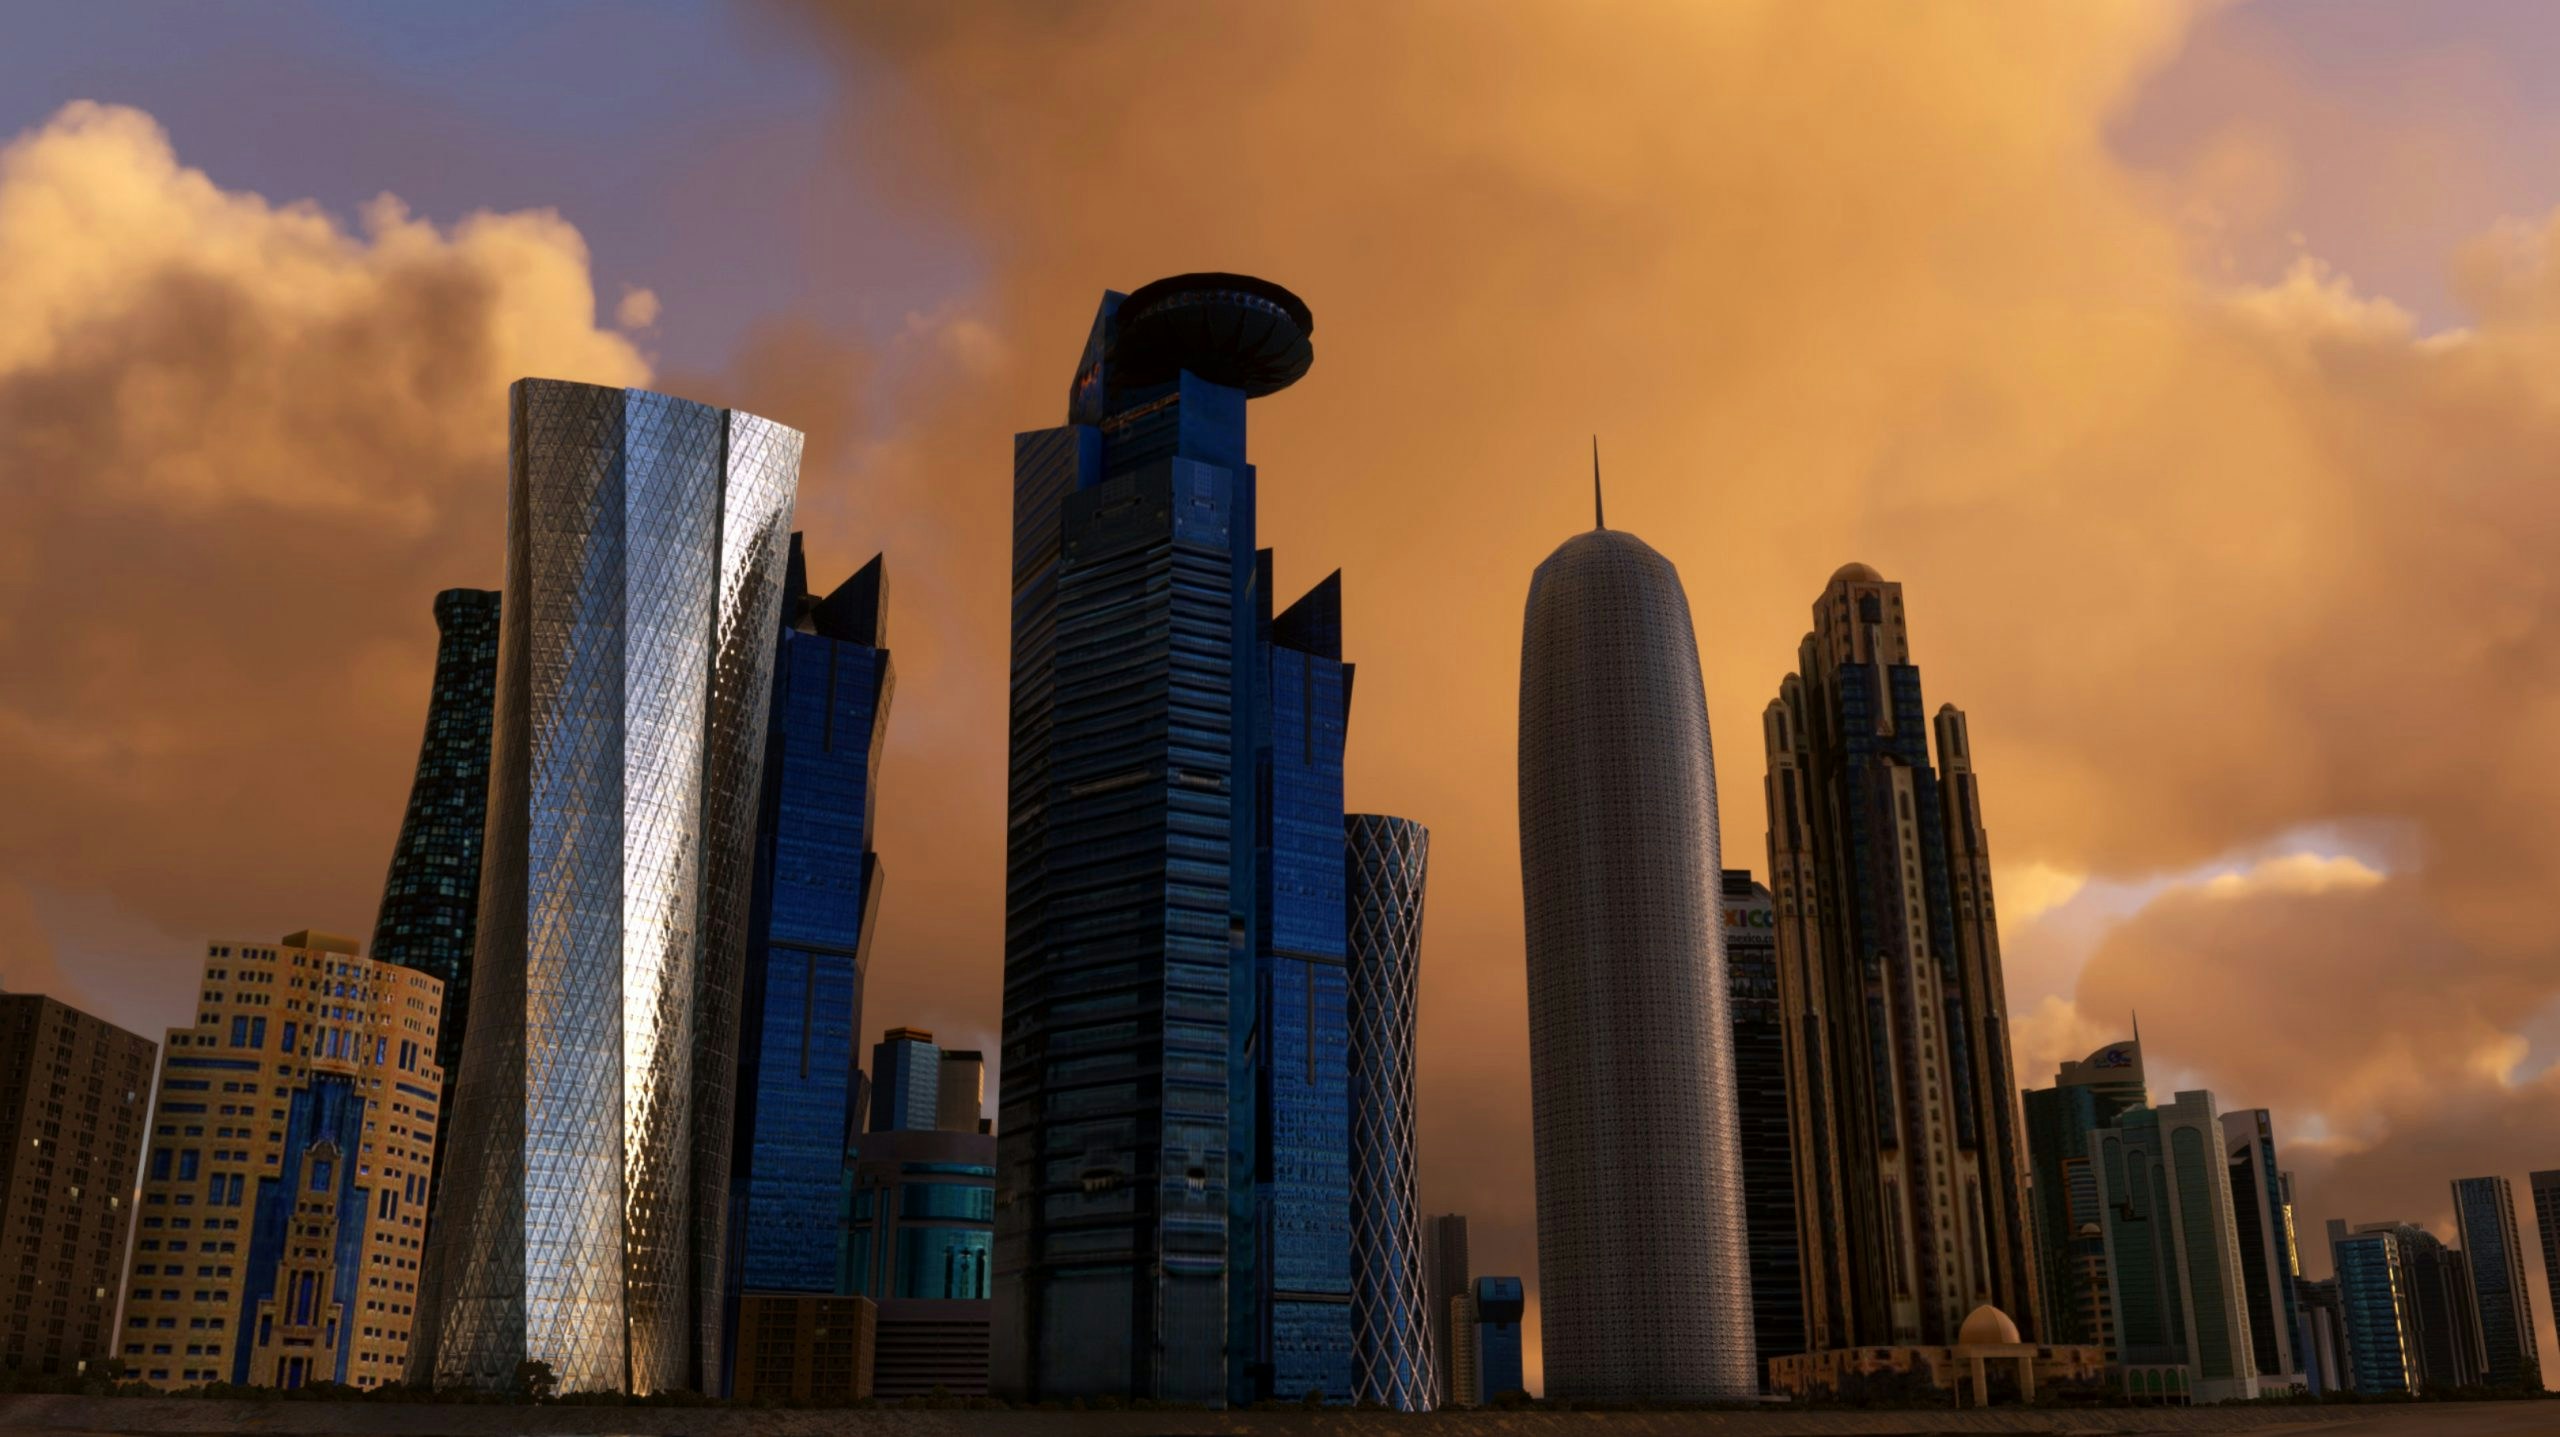 IronSim Releases Doha City Skyscrapers Landmarks for MSFS